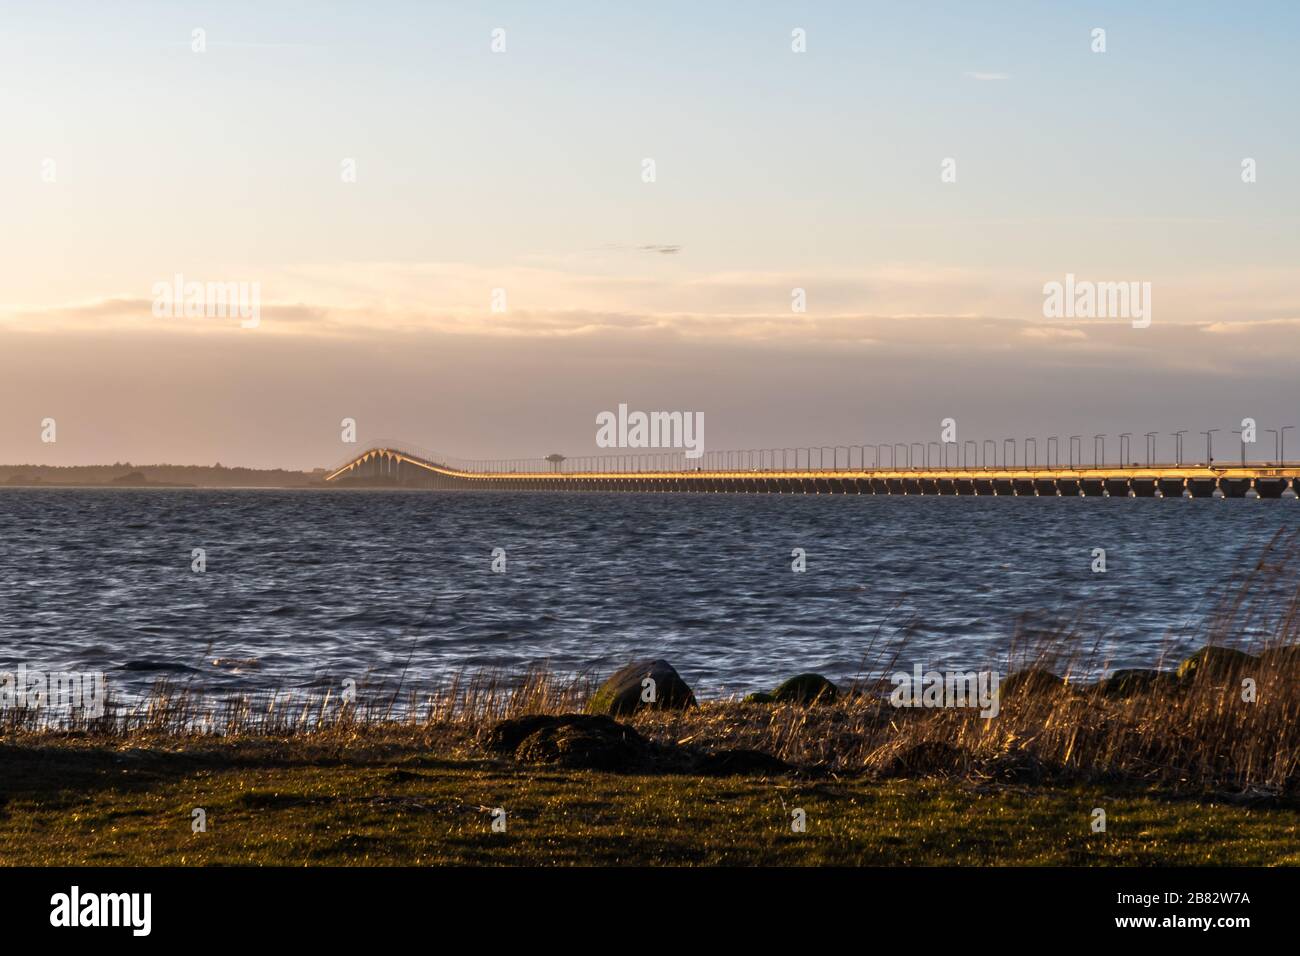 The Oland Bridge in evening sunshine - connecting the island Oland with mainland Sweden Stock Photo